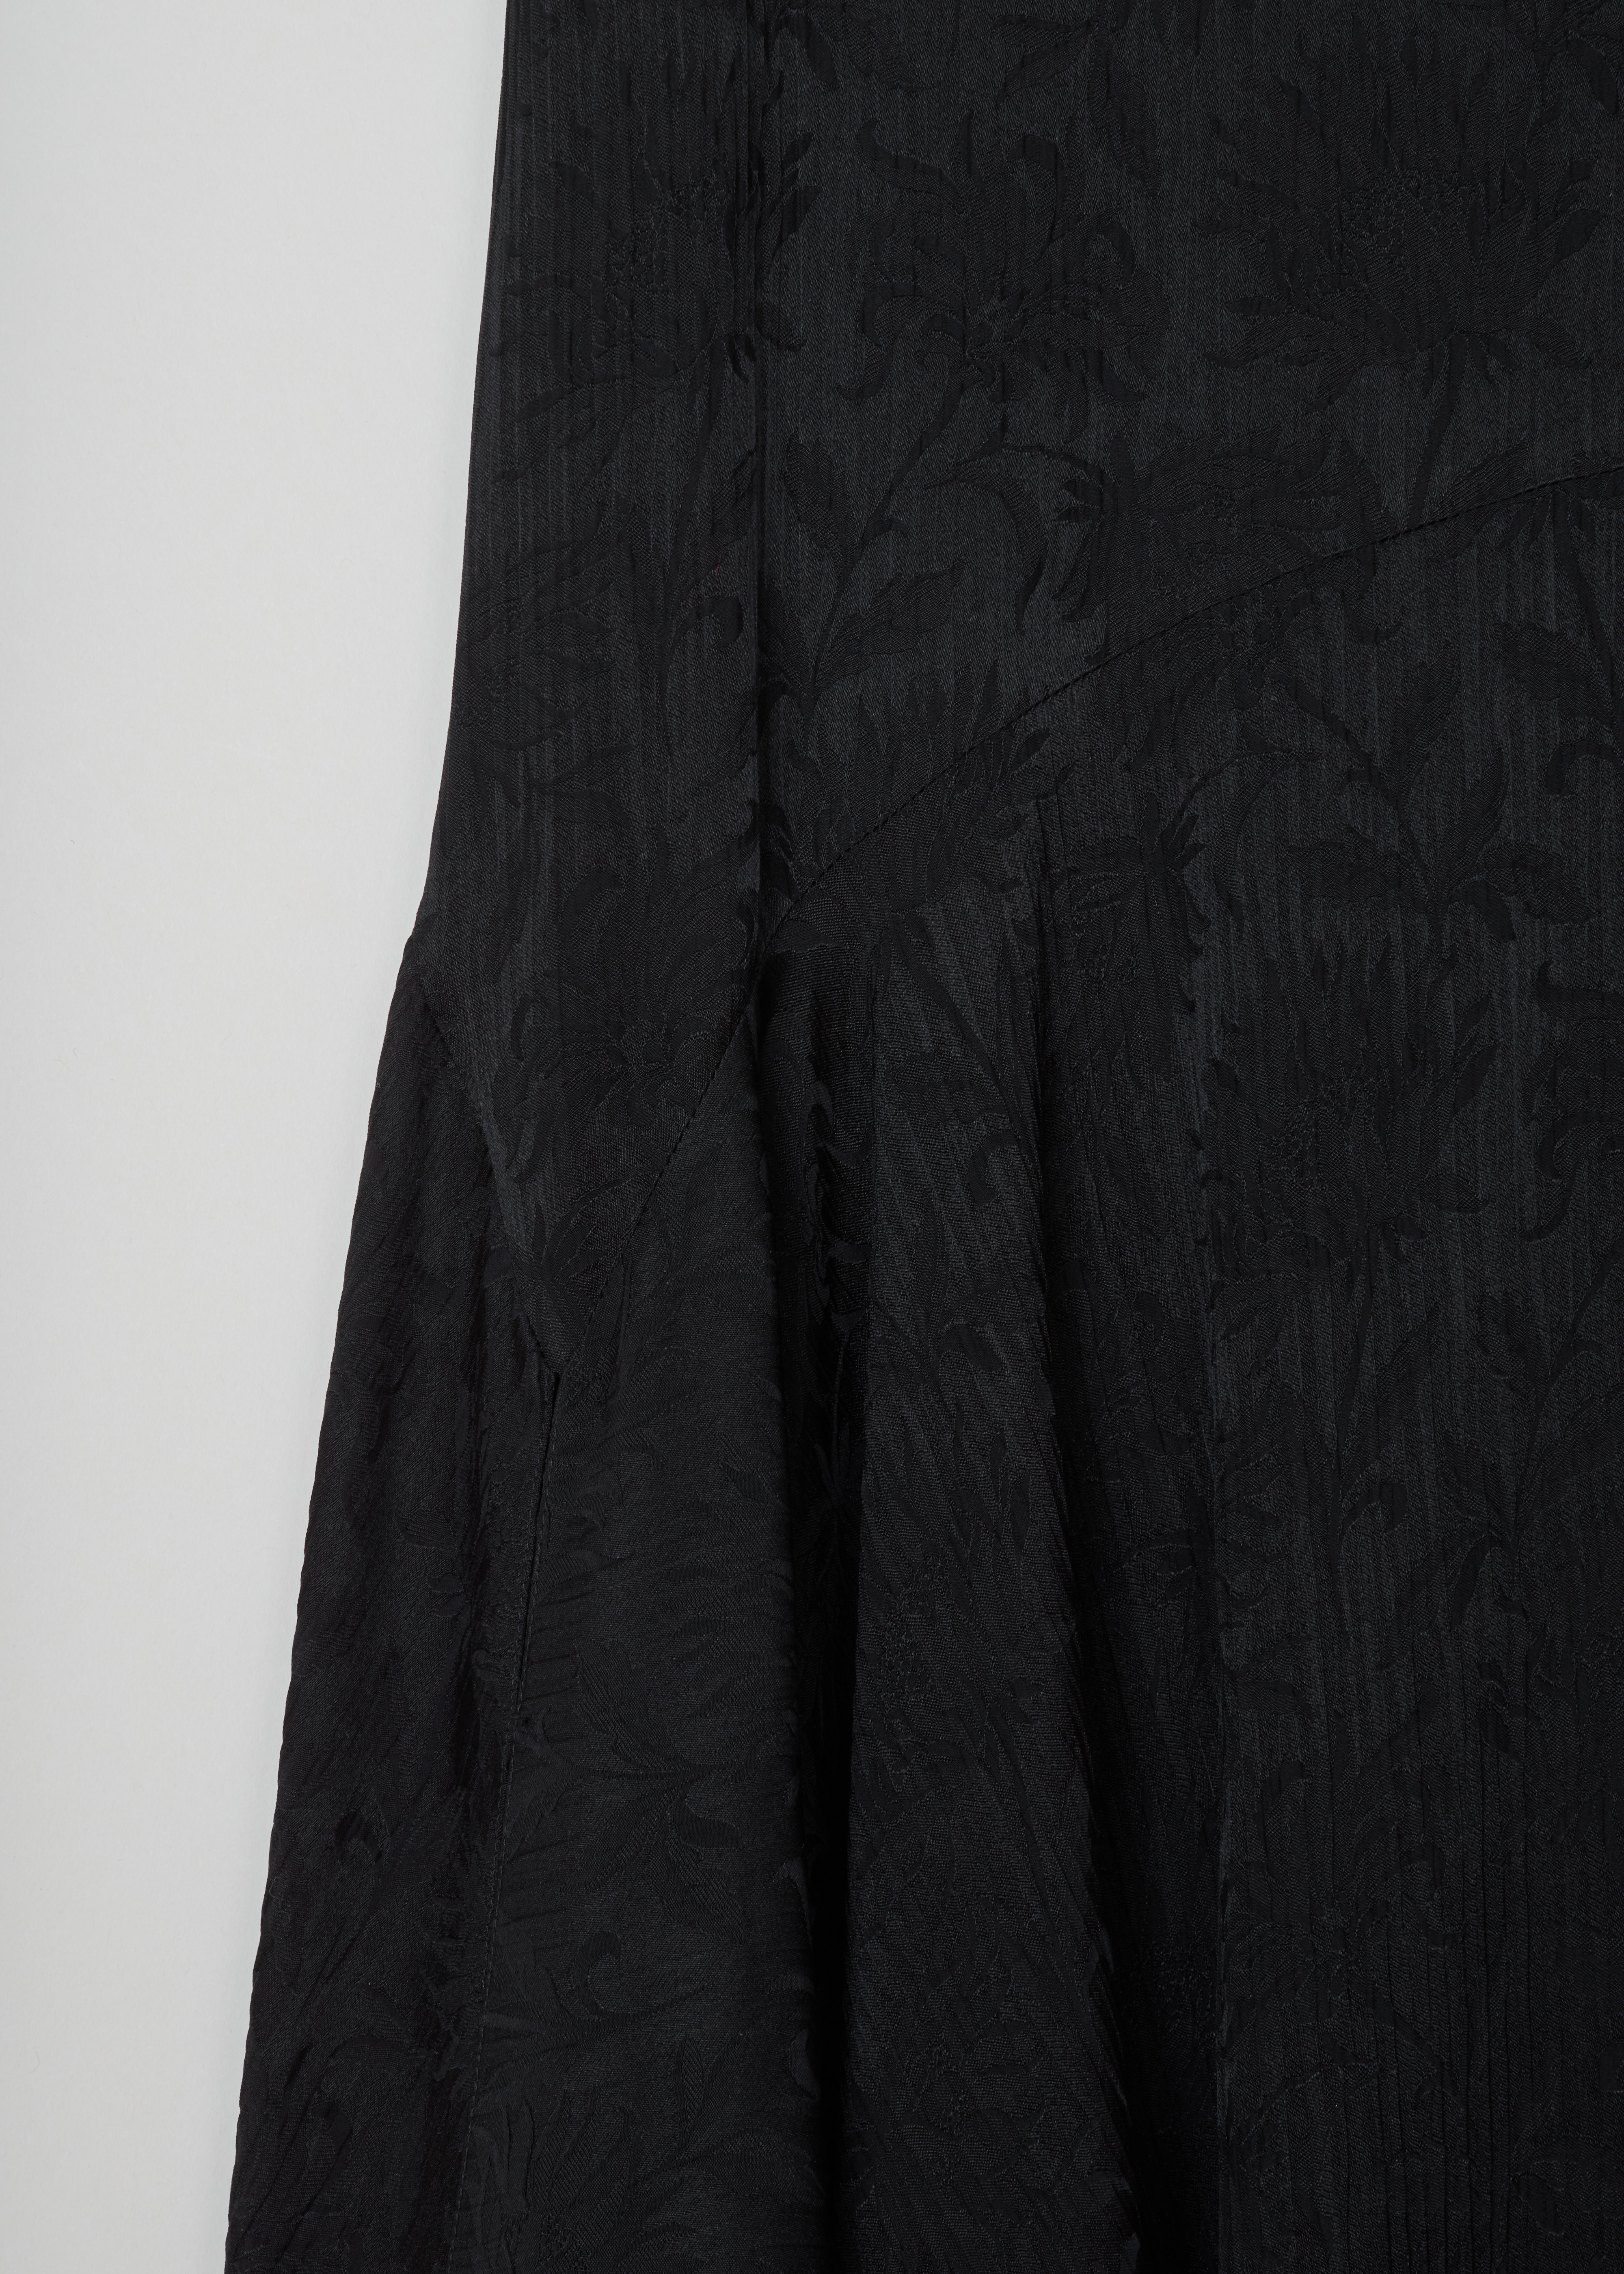 ChloÃ© Silk flower print skirt CHC19AJU14329001_001_Black detail. Silk and viscose skirt from creased jacquard fabric with a flower pattern. The skirt features a fitted upper and a flared lower section to create an elegant, flowing silhouette. 